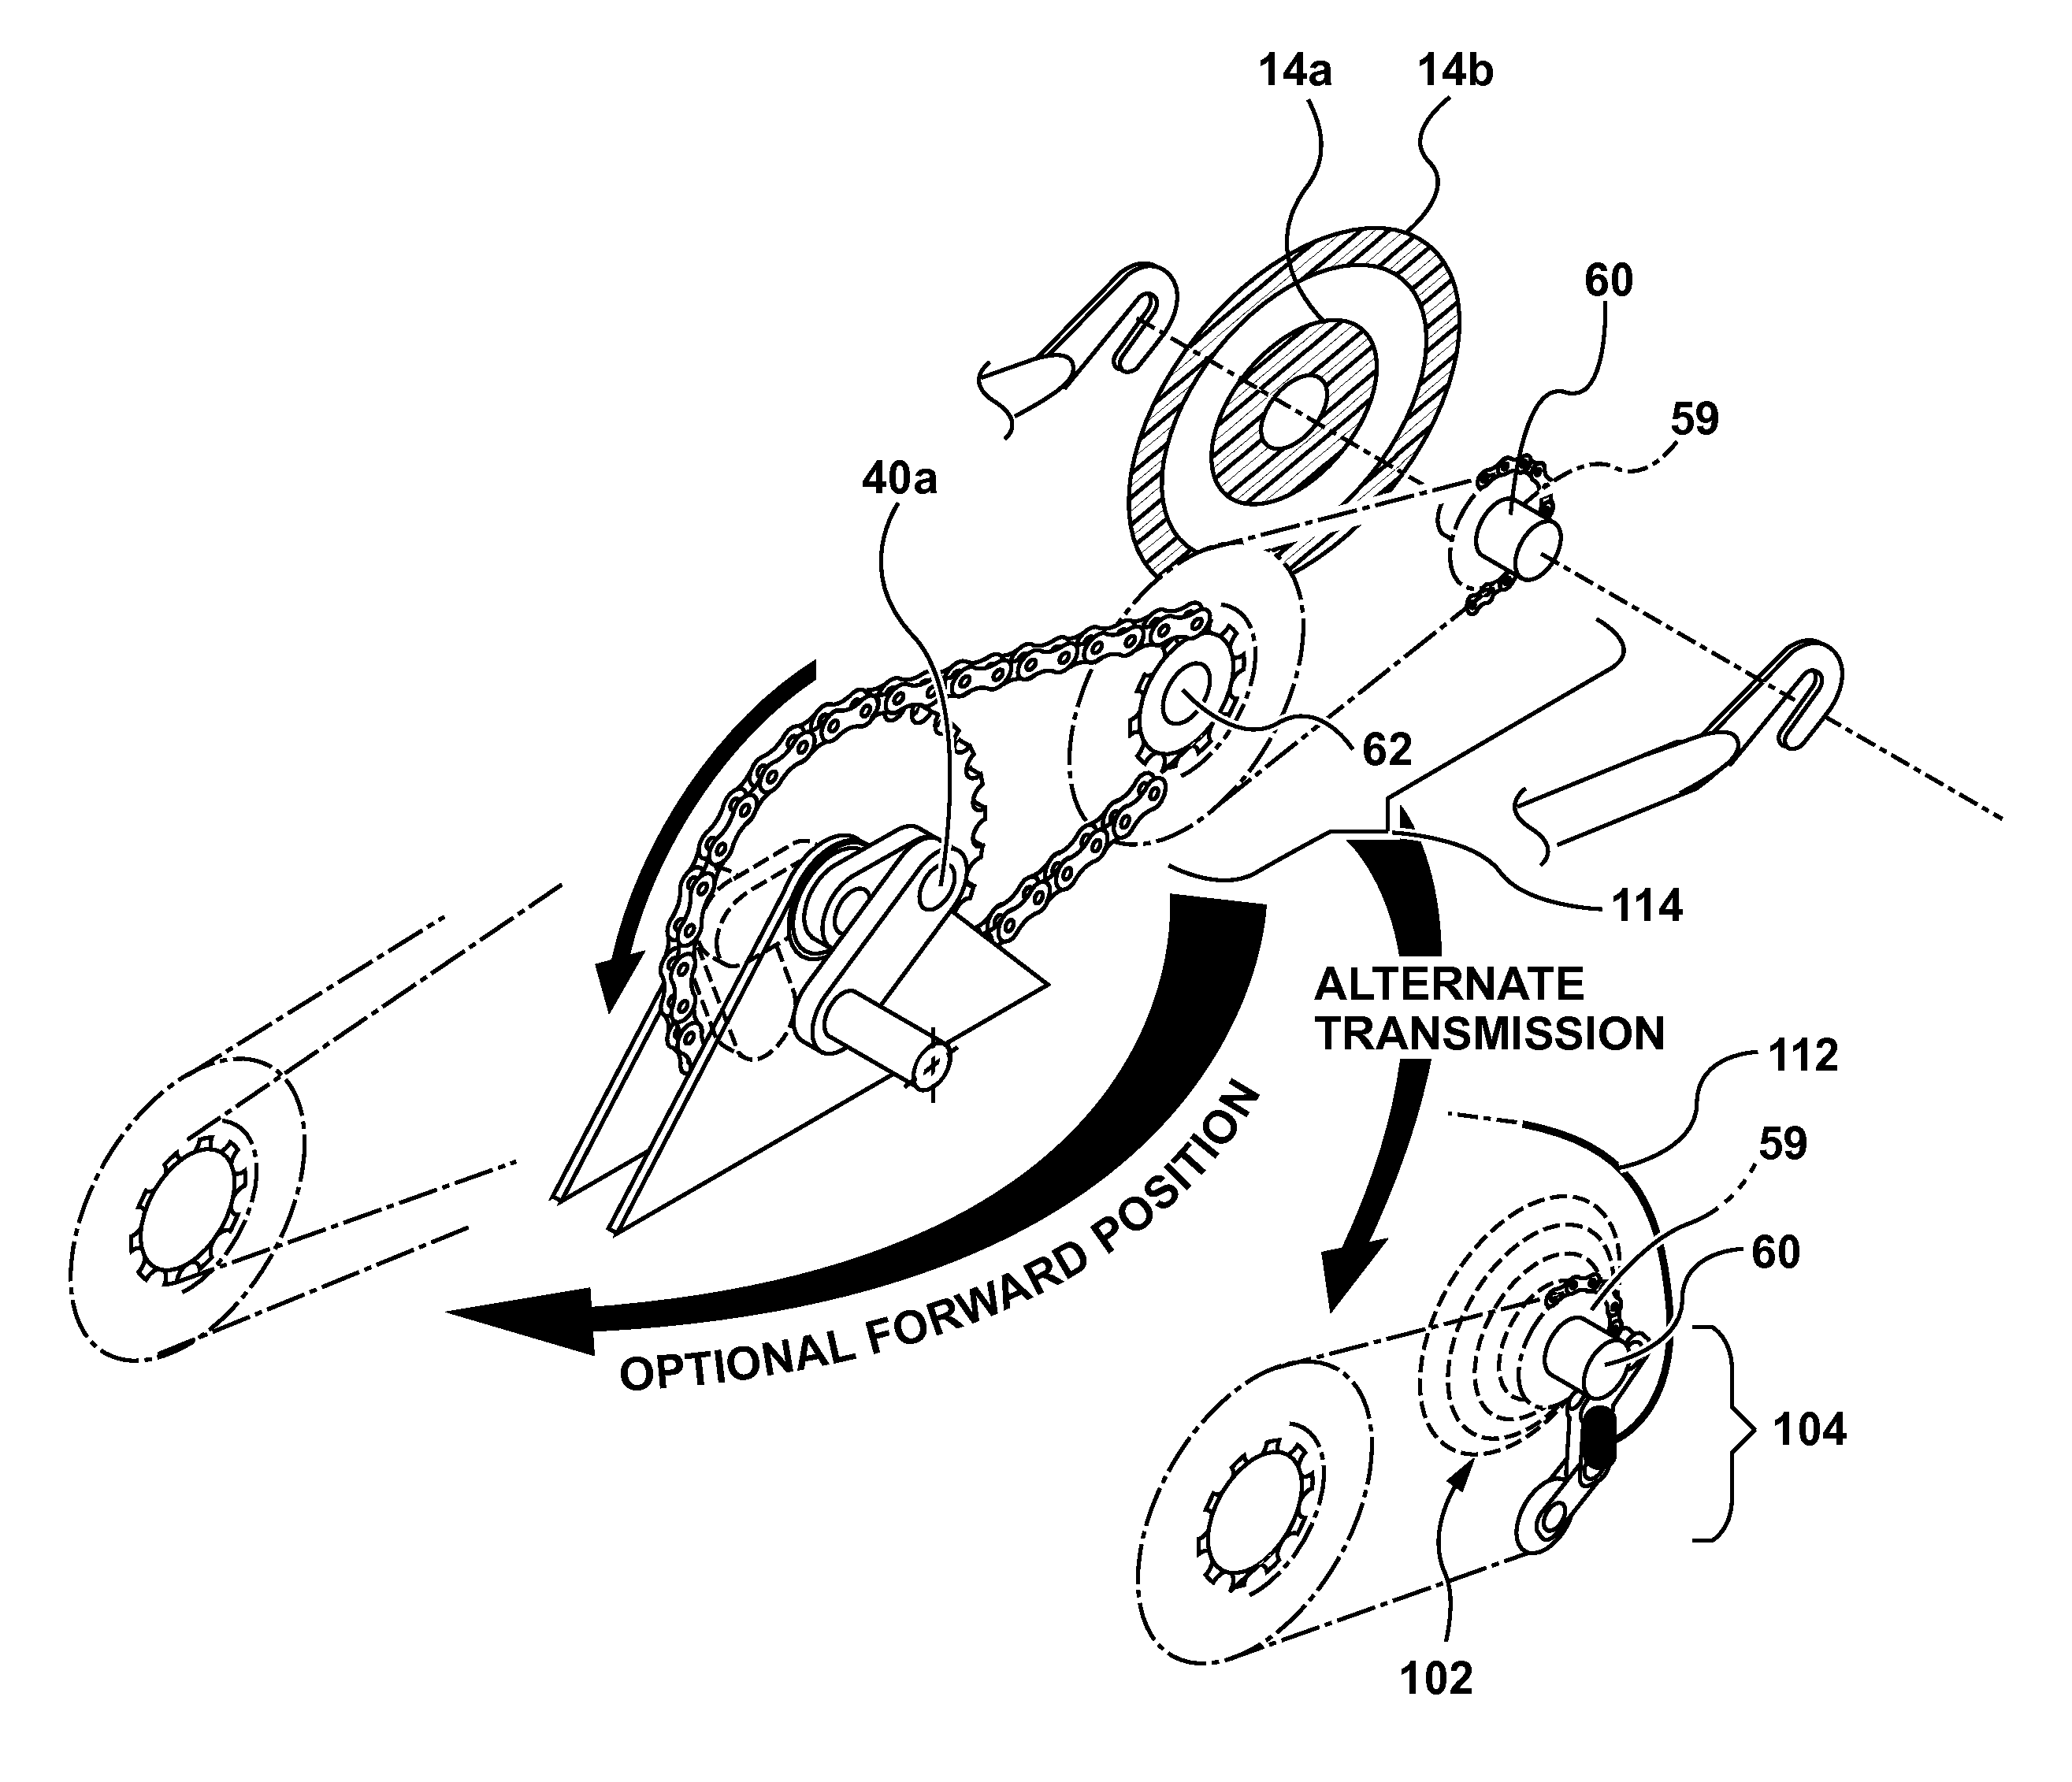 Pedal-drive system for manually propelling multi-wheeled cycles